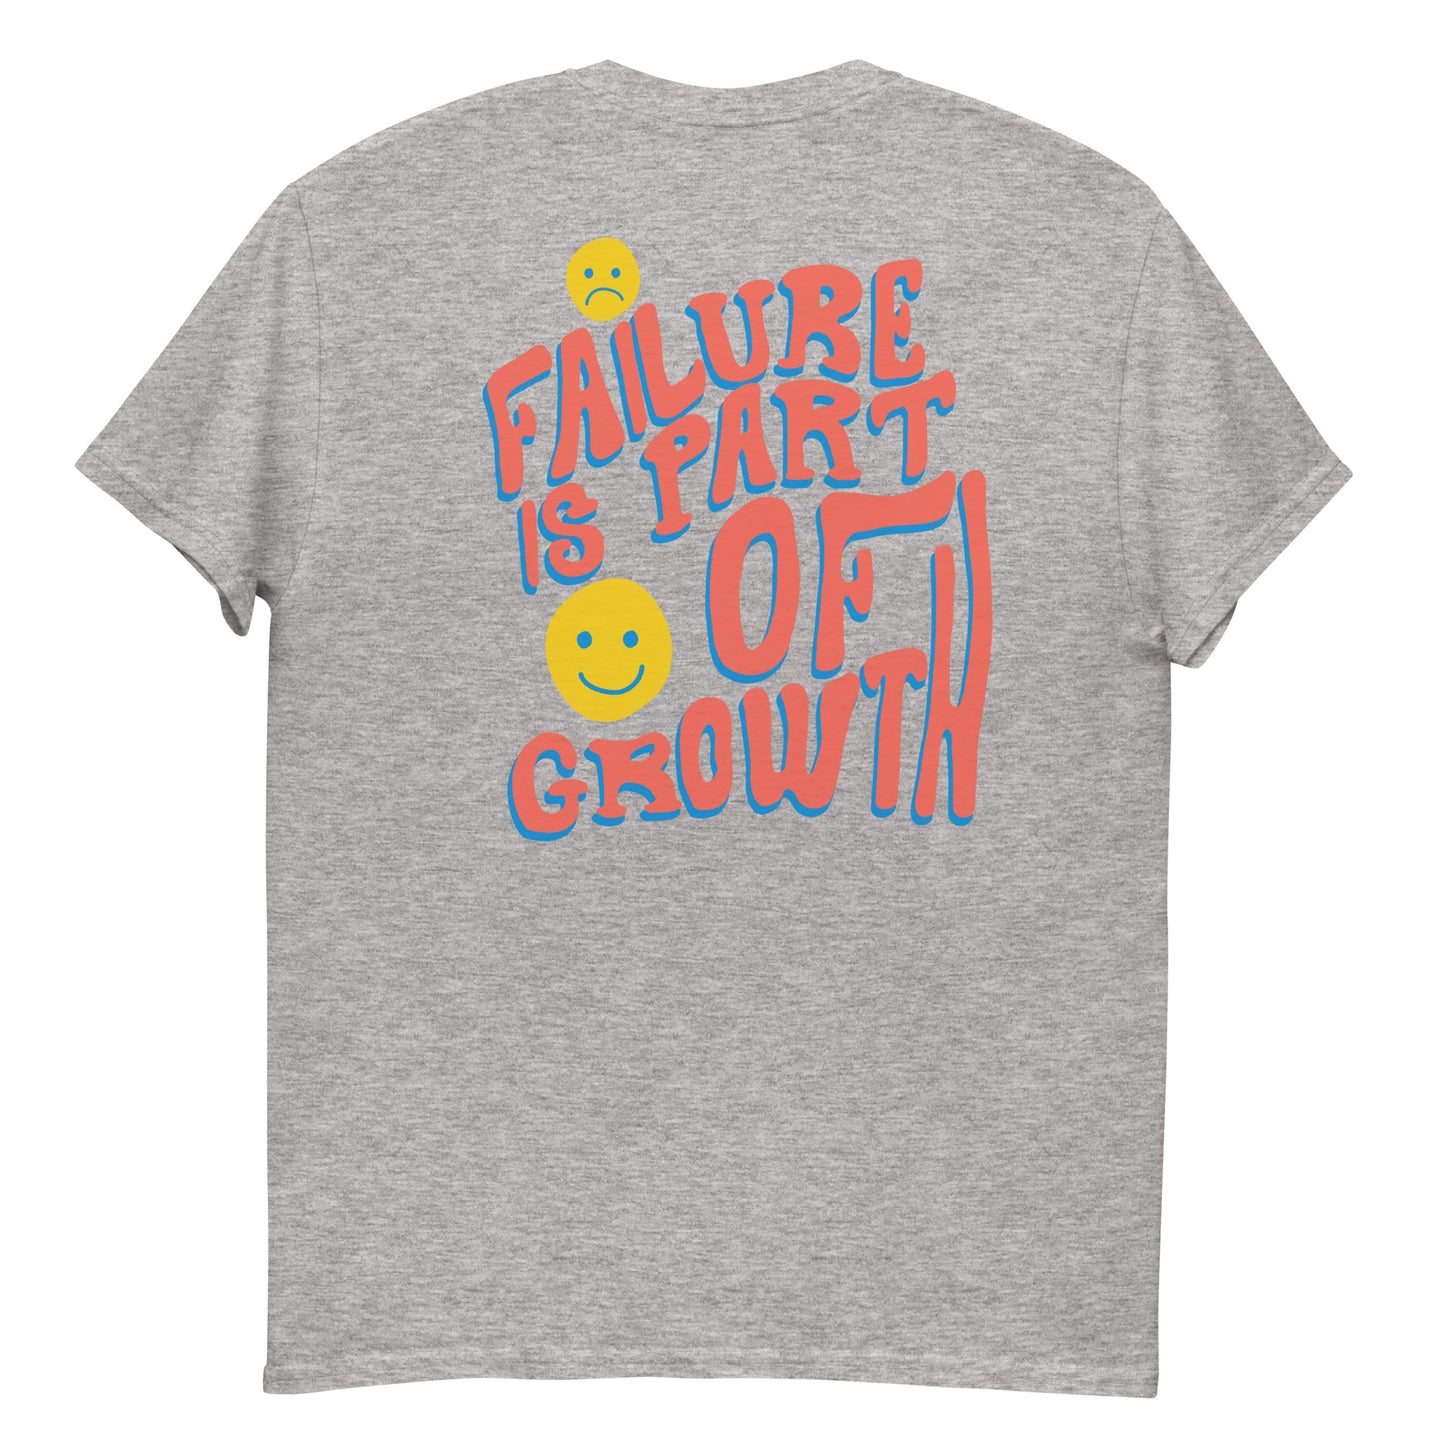 Failure is a part of Growth tee